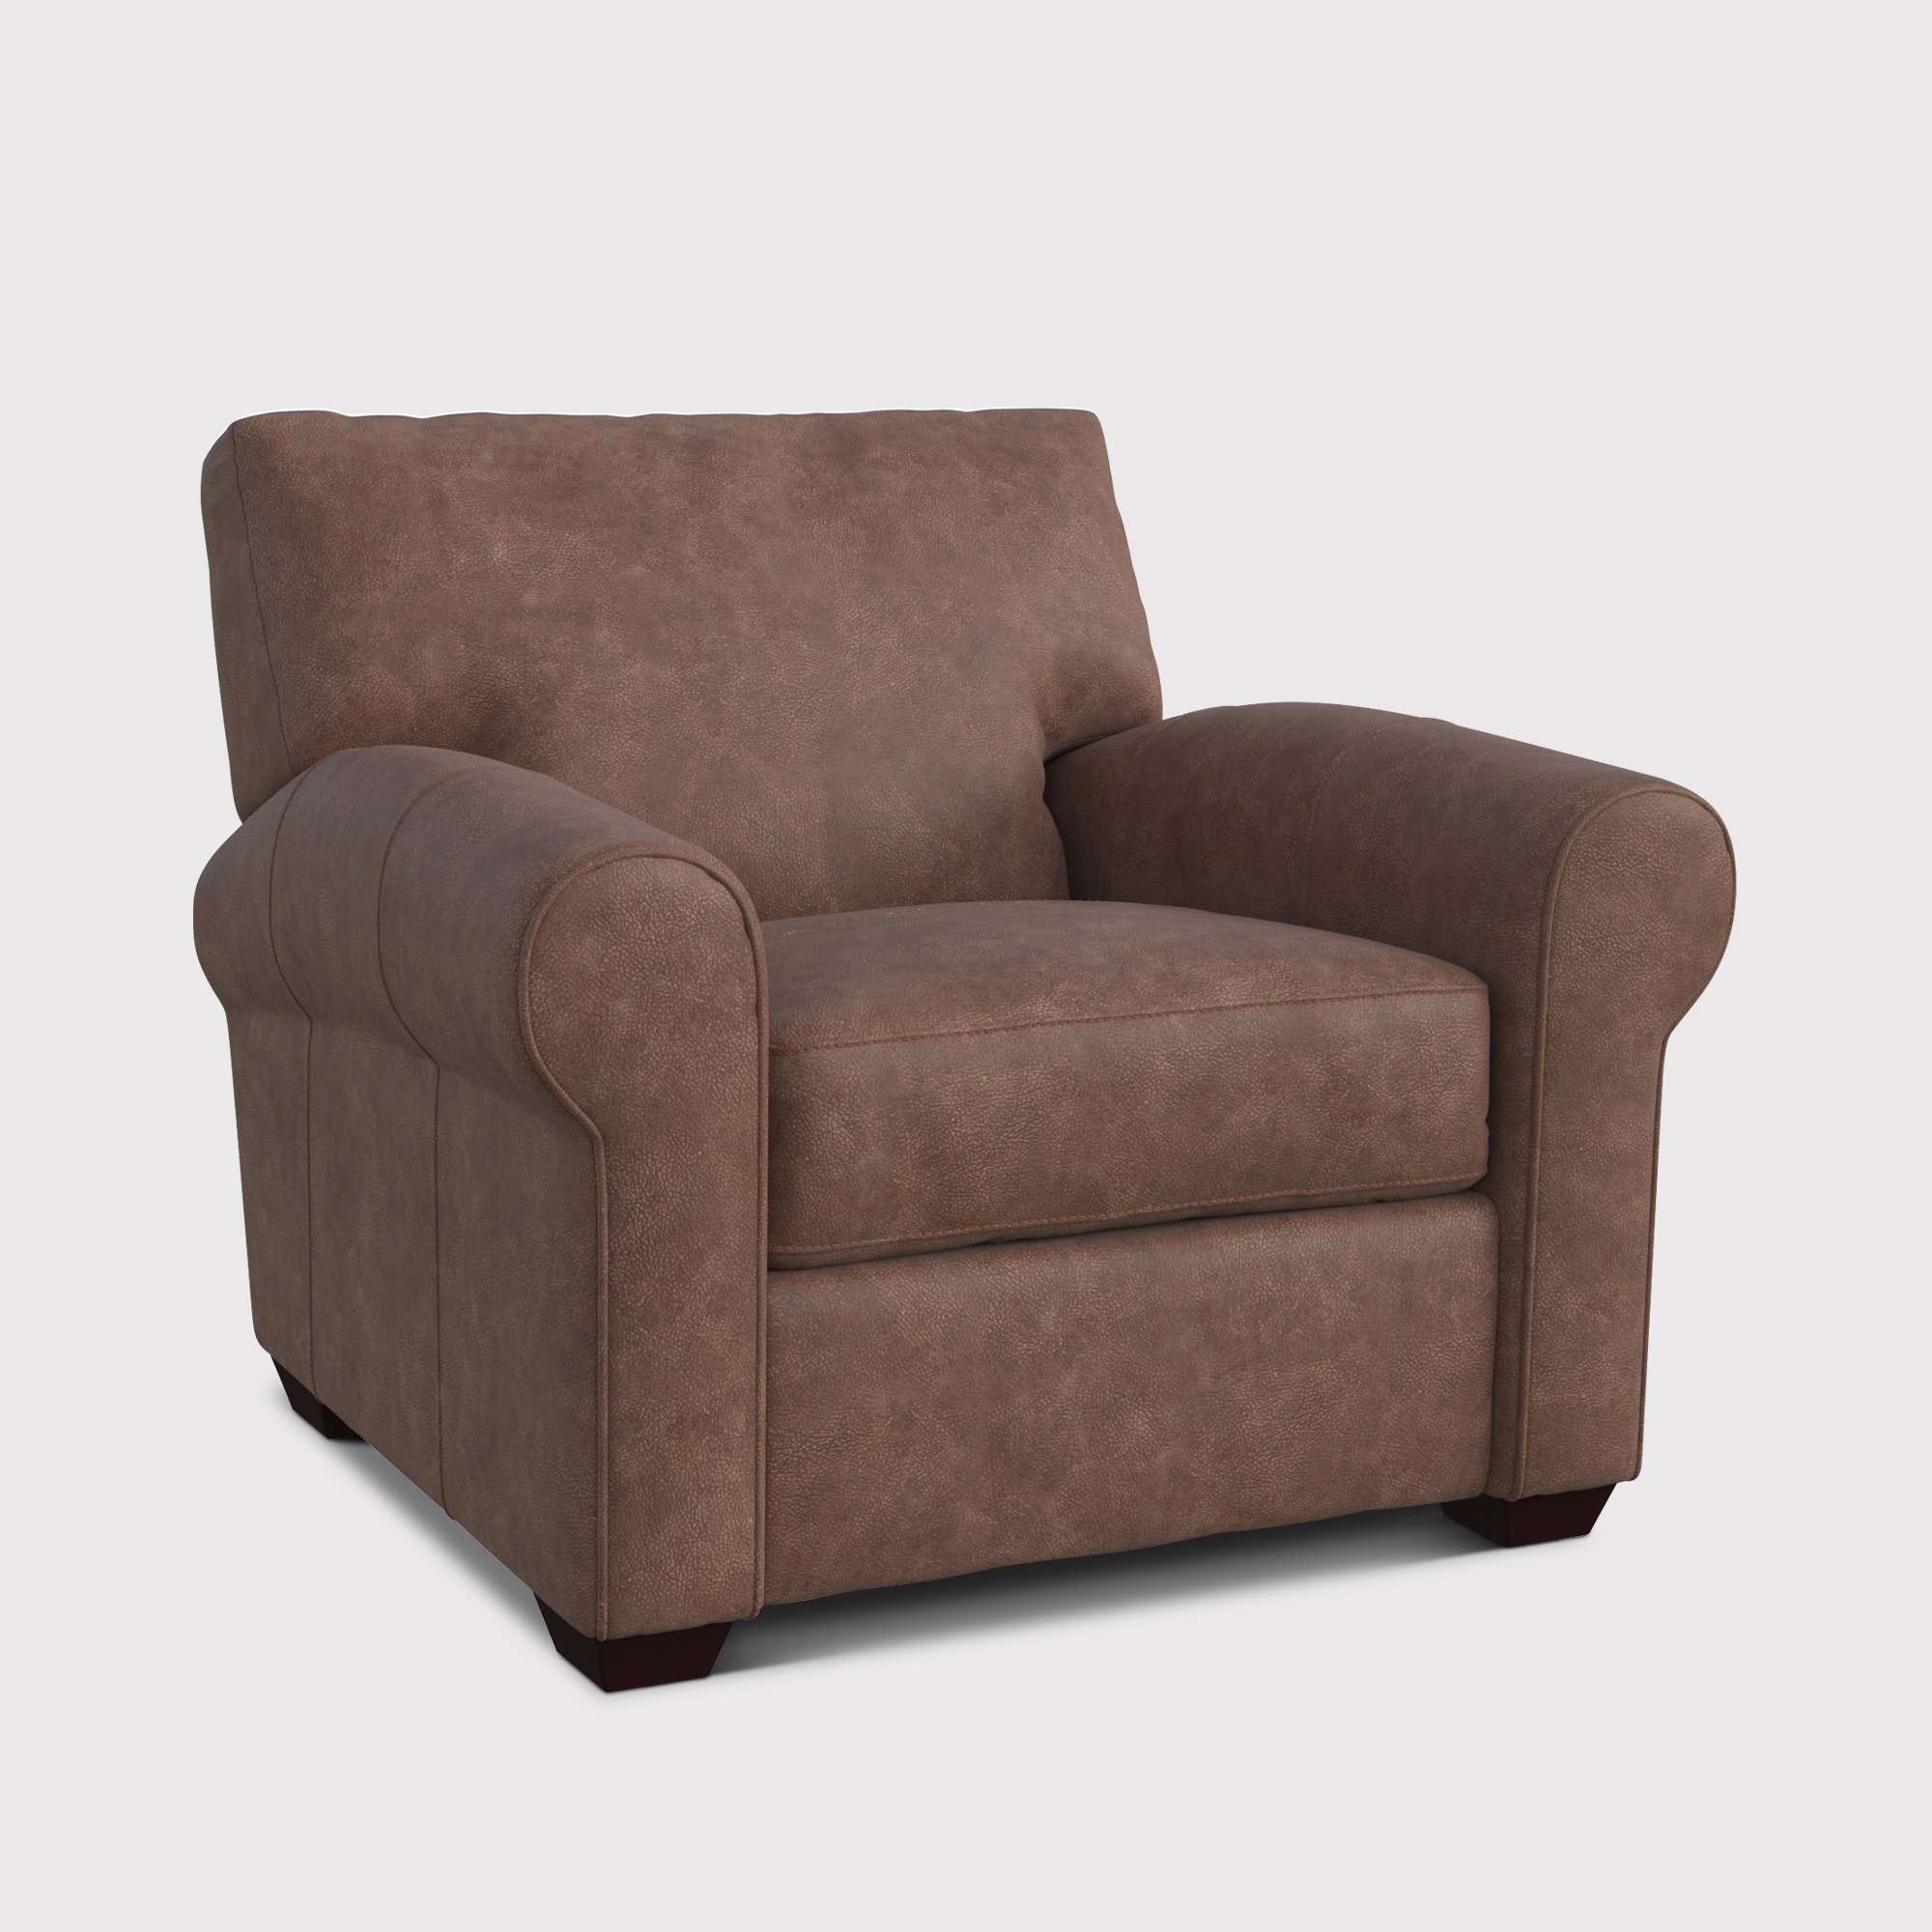 Houston Pushback Recliner Chair, Brown Leather | Barker & Stonehouse